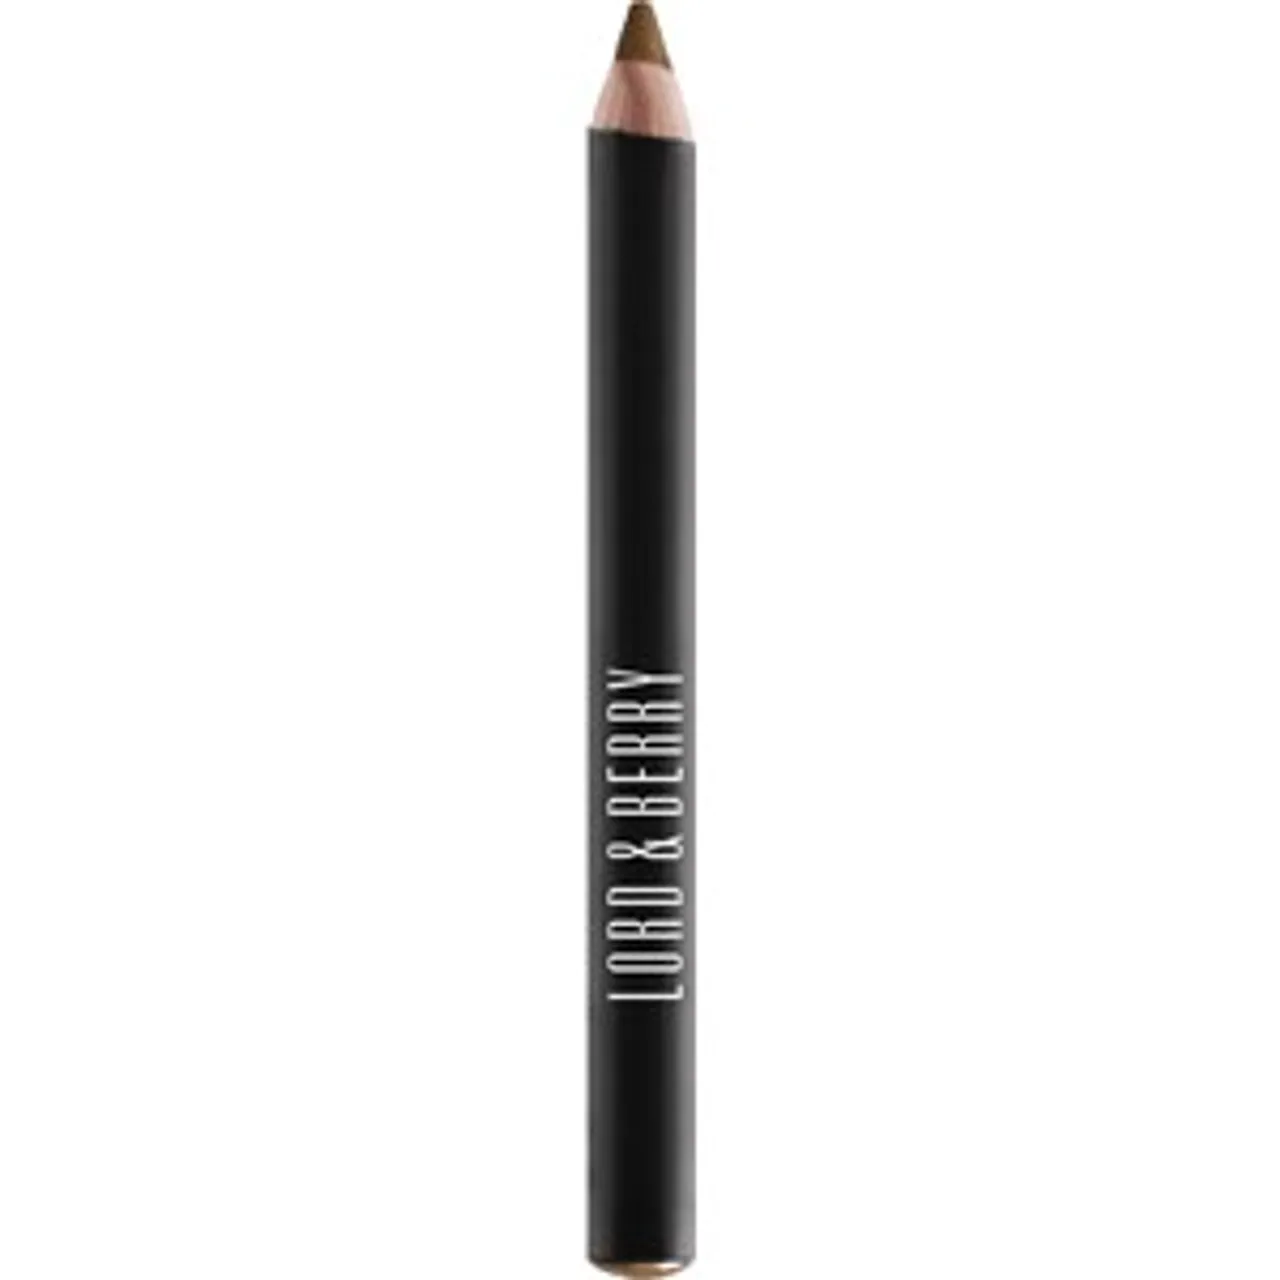 Lord & Berry Line Shade Eye Pencil 2 0.70 g